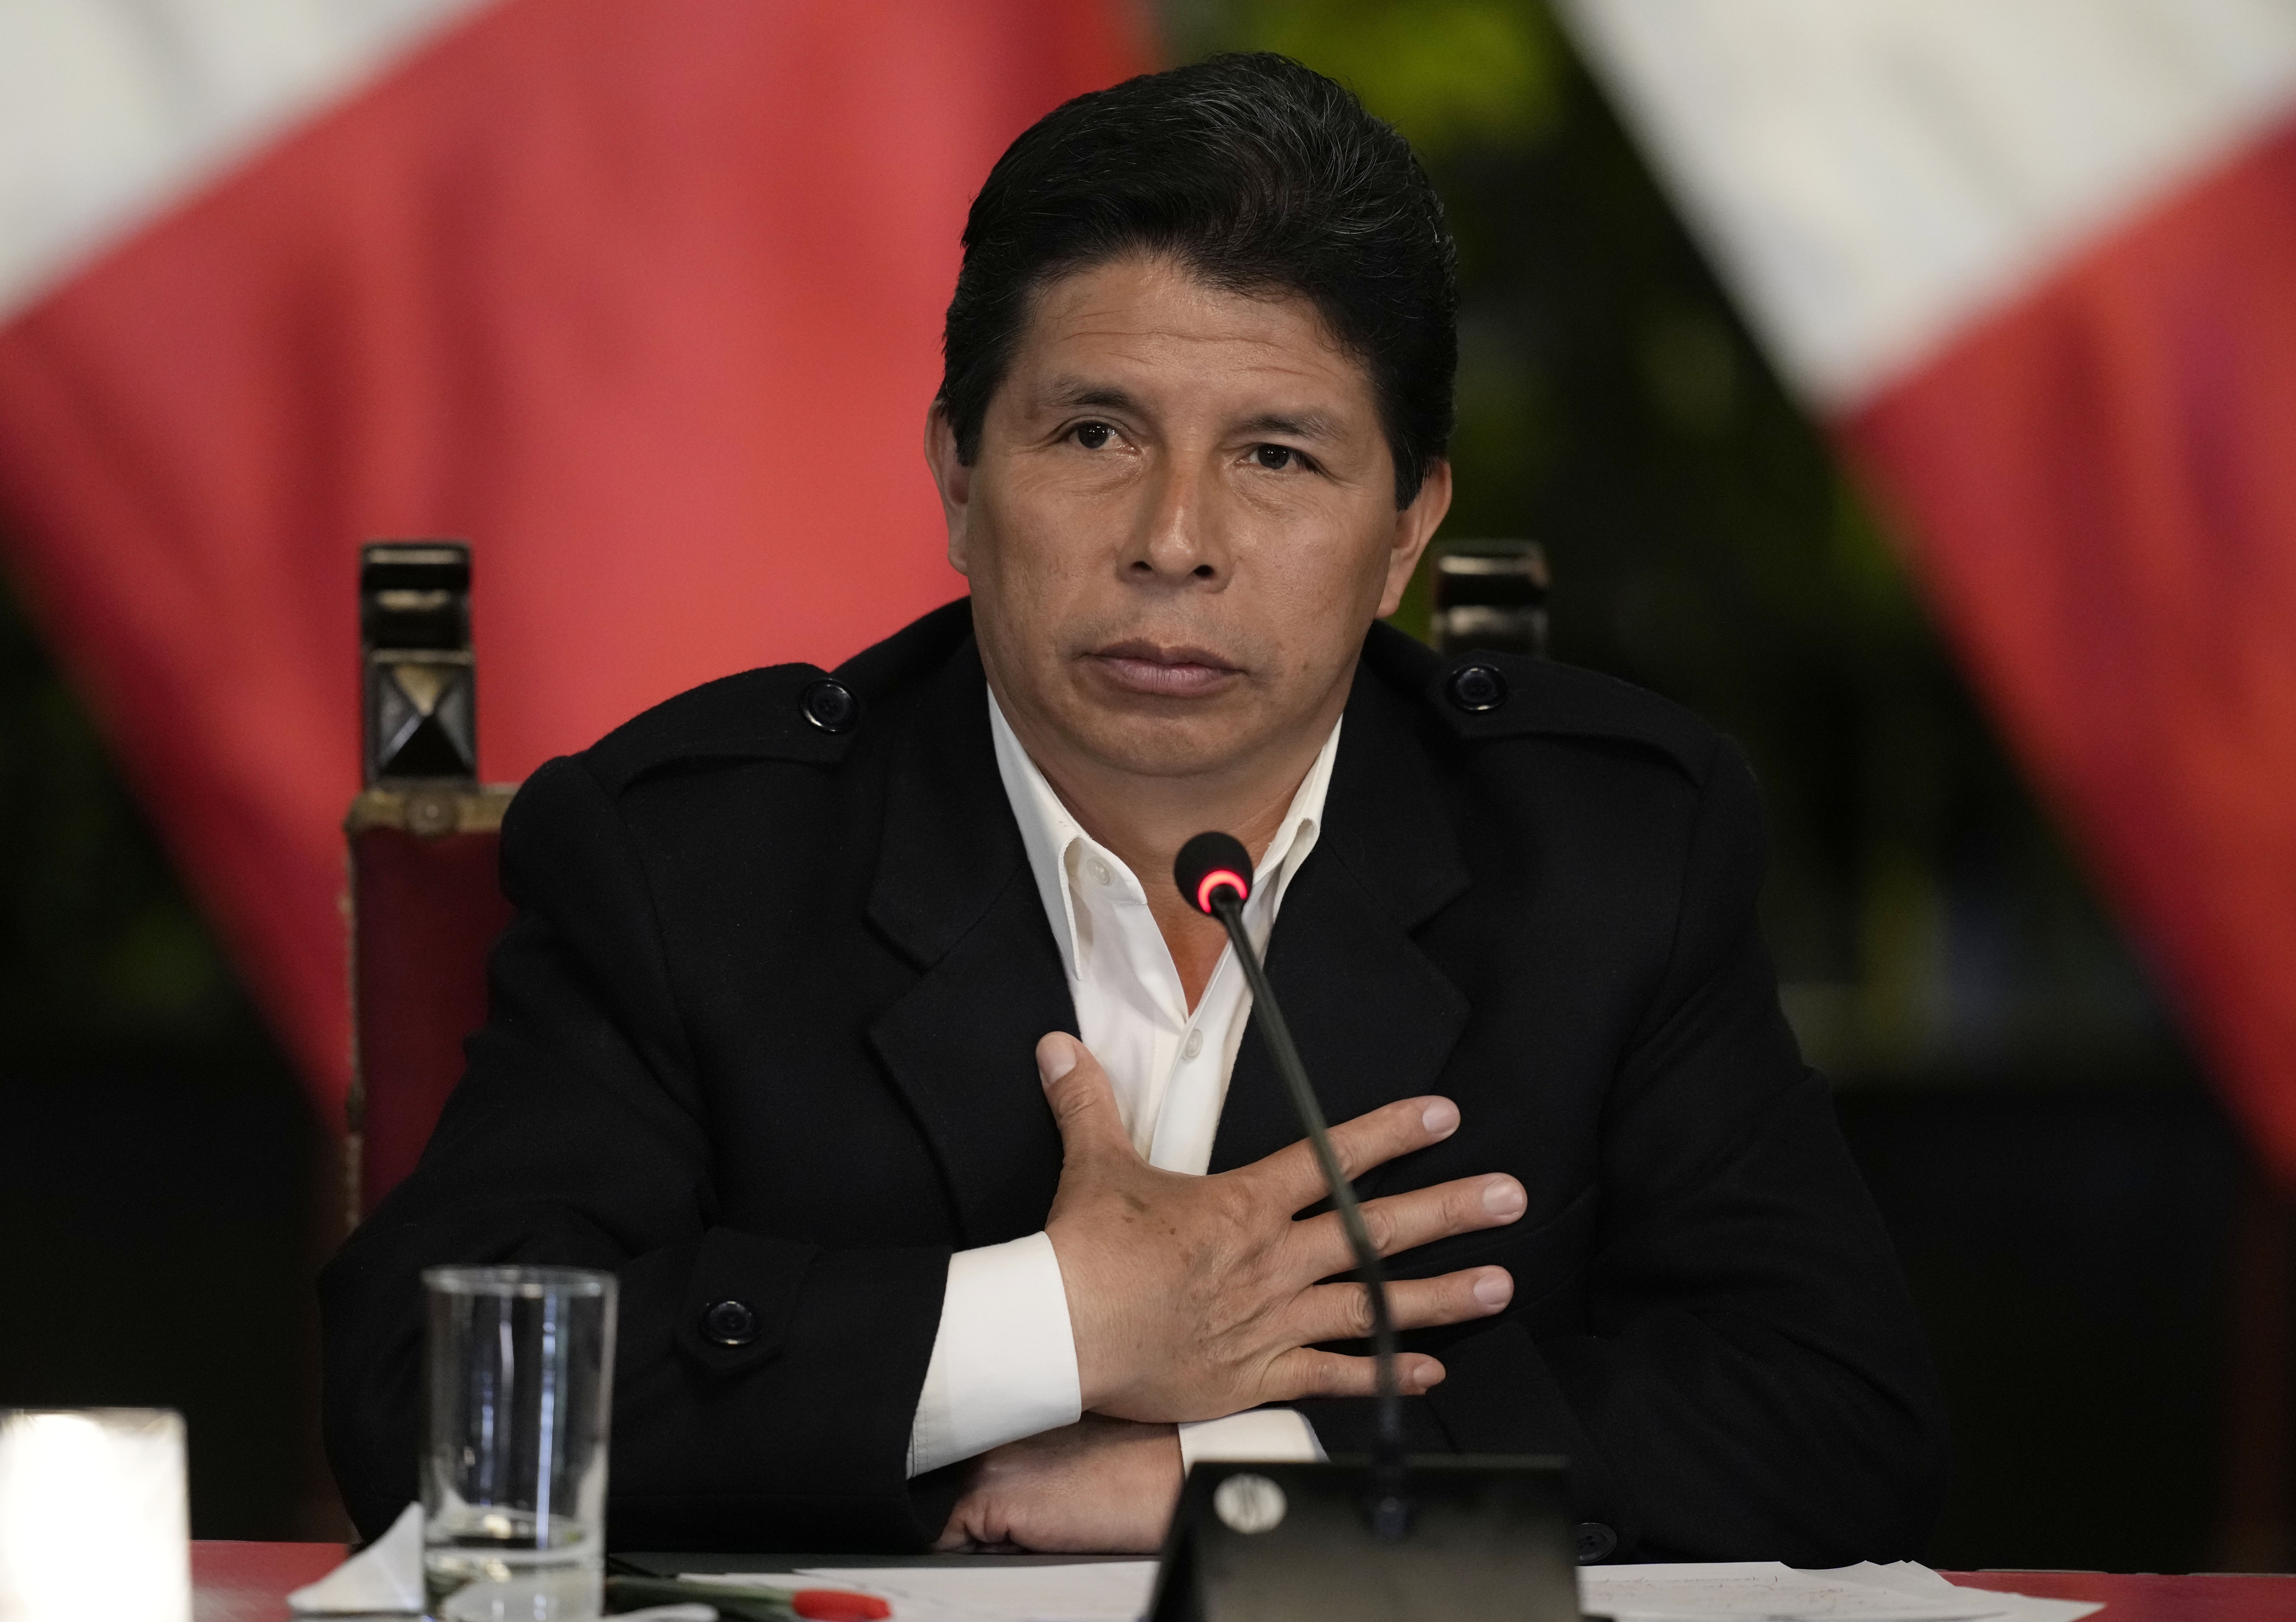 Peru’s President Ousted After Trying to Dissolve Congress